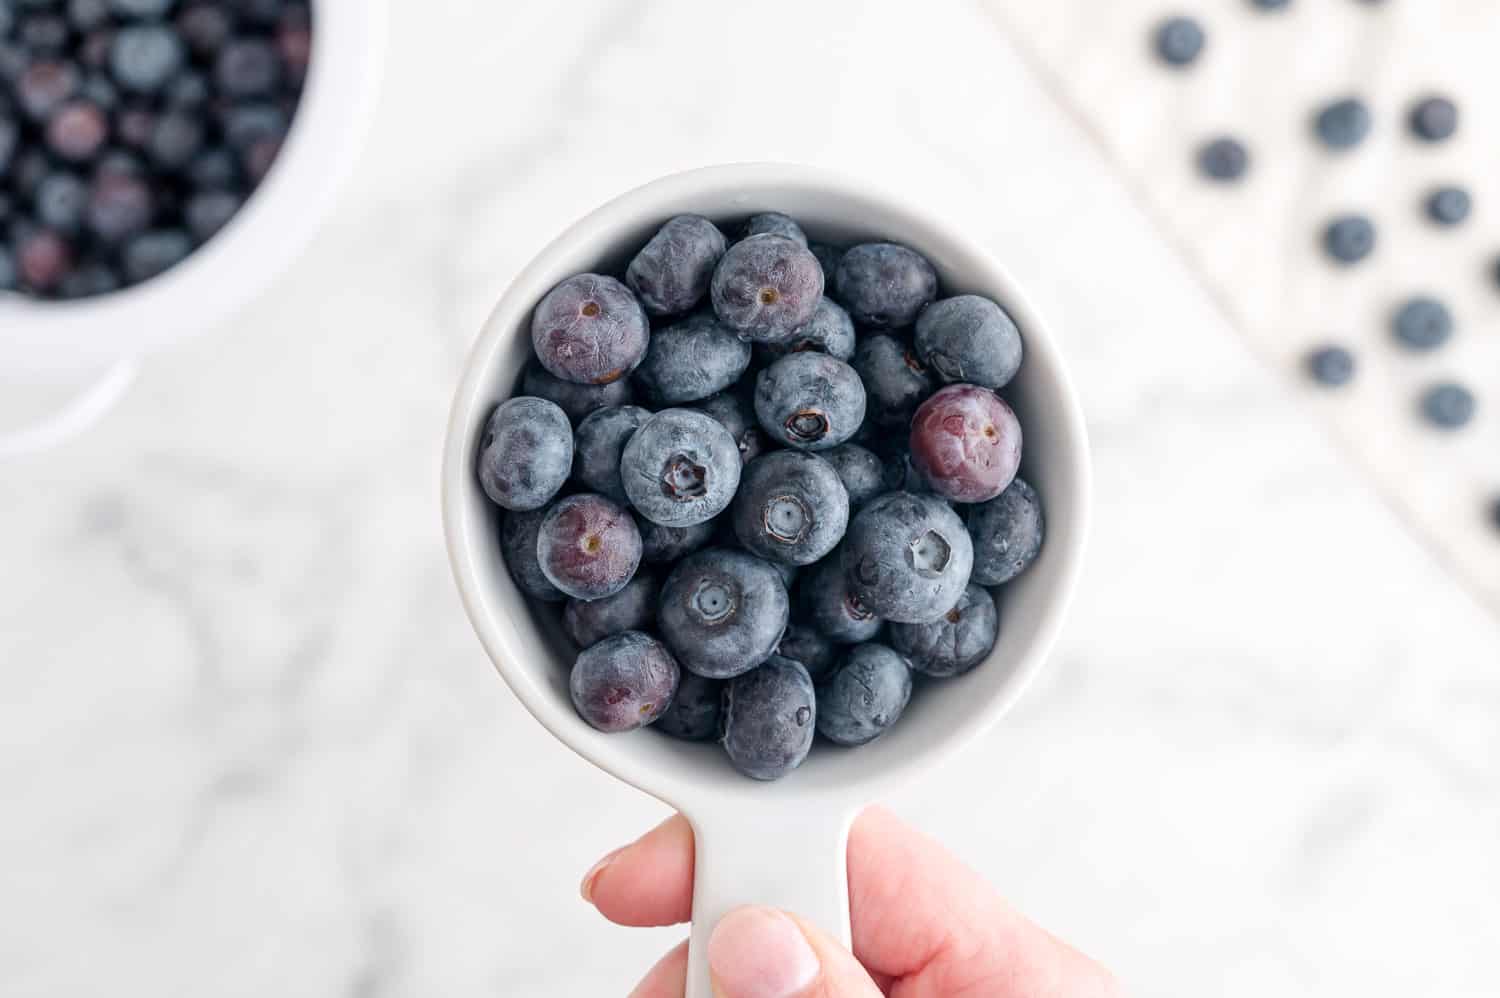 Blueberries in a measuring cup.